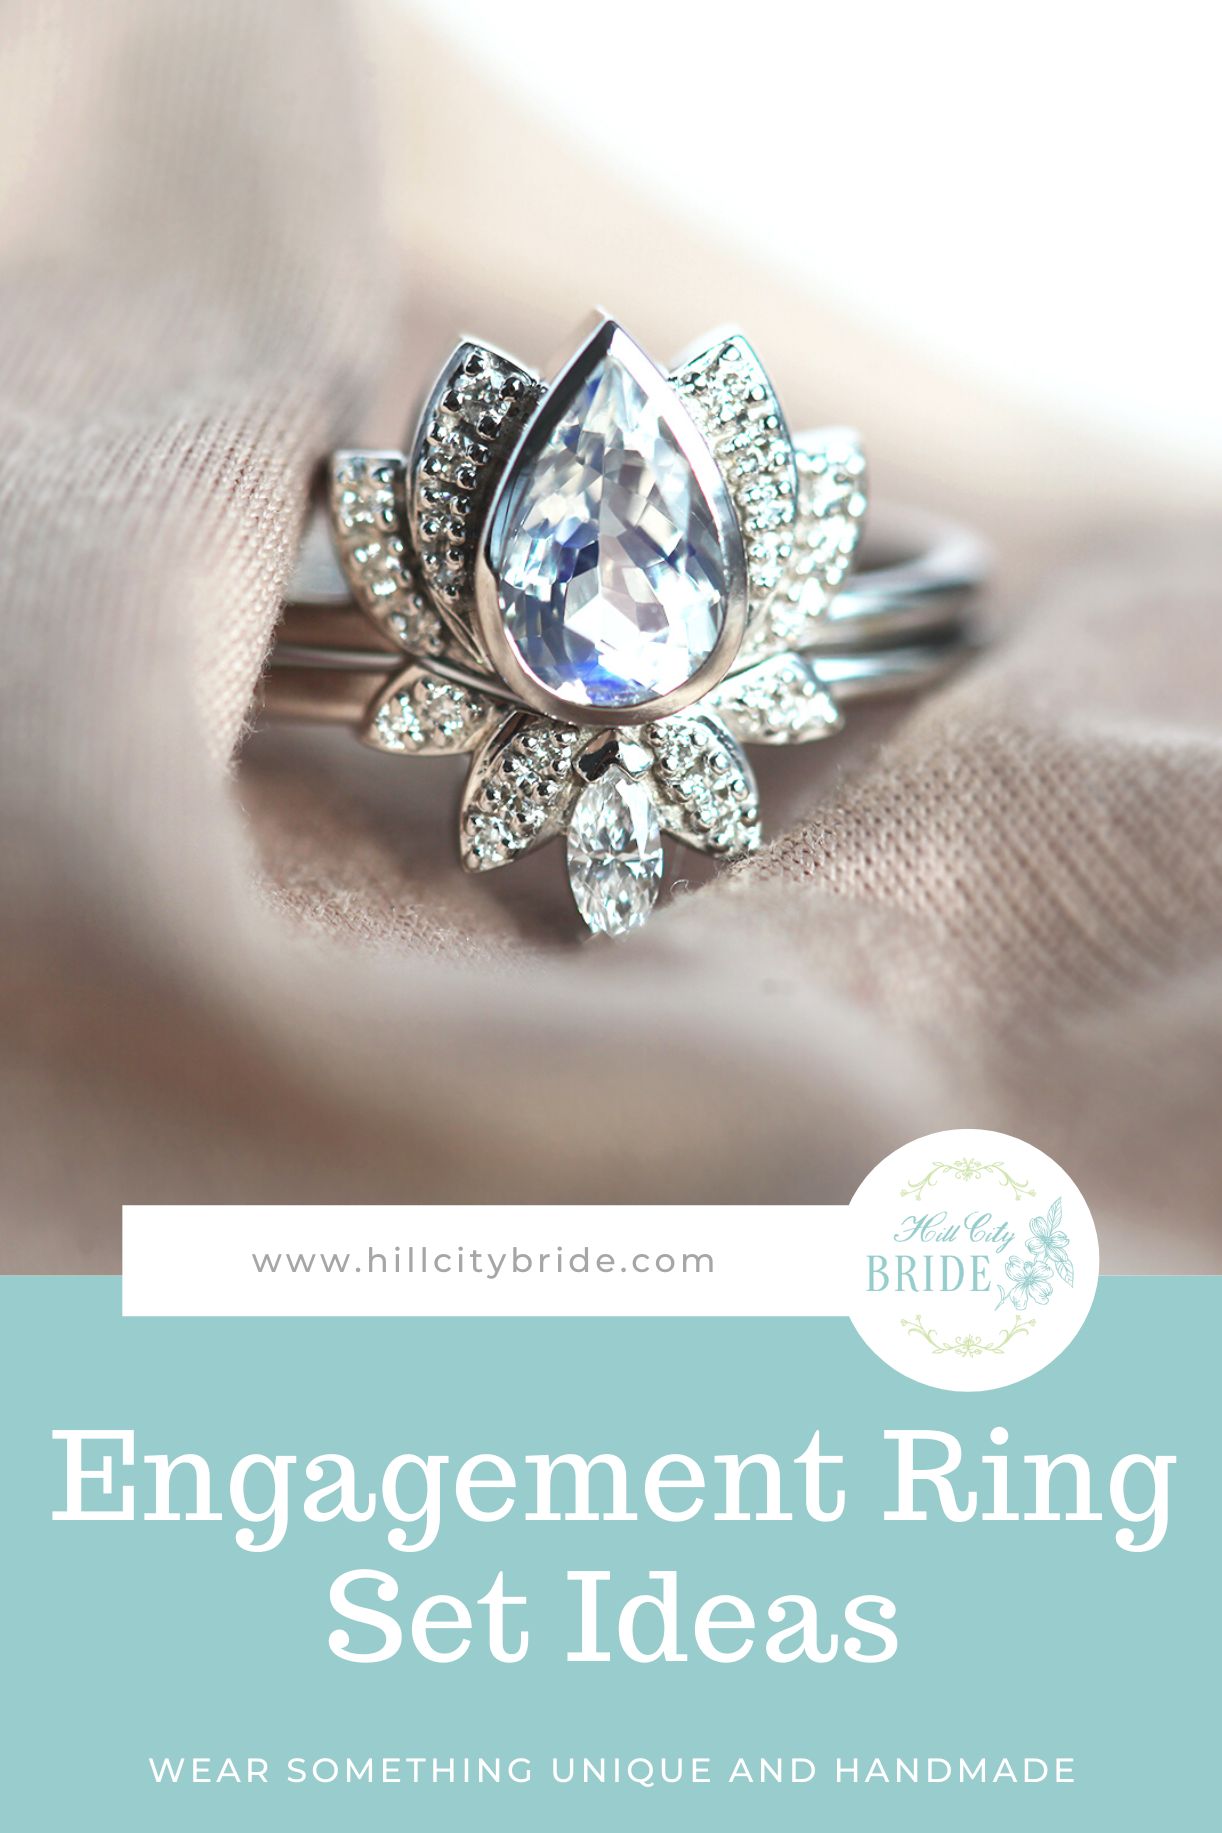 Reasons to Get a Unique Engagement Ring Set